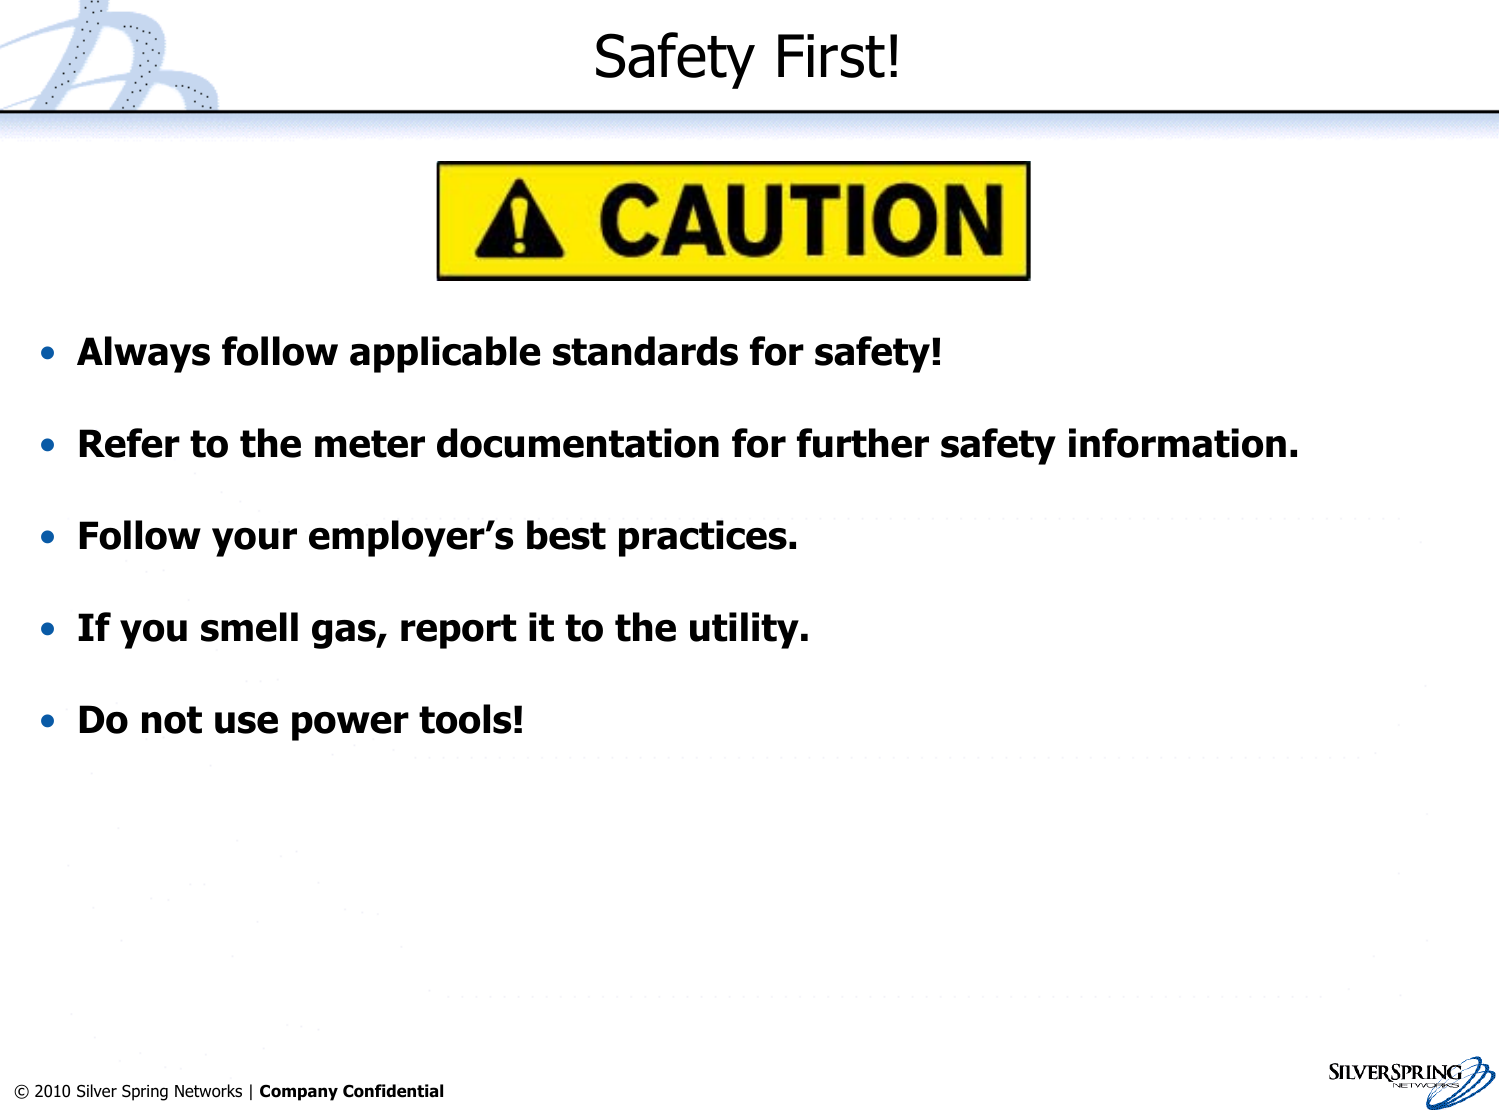 3© 2010 Silver Spring Networks | Company Confidential Safety First!•Always follow applicable standards for safety!•Refer to the meter documentation for further safety information.•Follow your employer’s best practices.•If you smell gas, report it to the utility.•Do not use power tools!